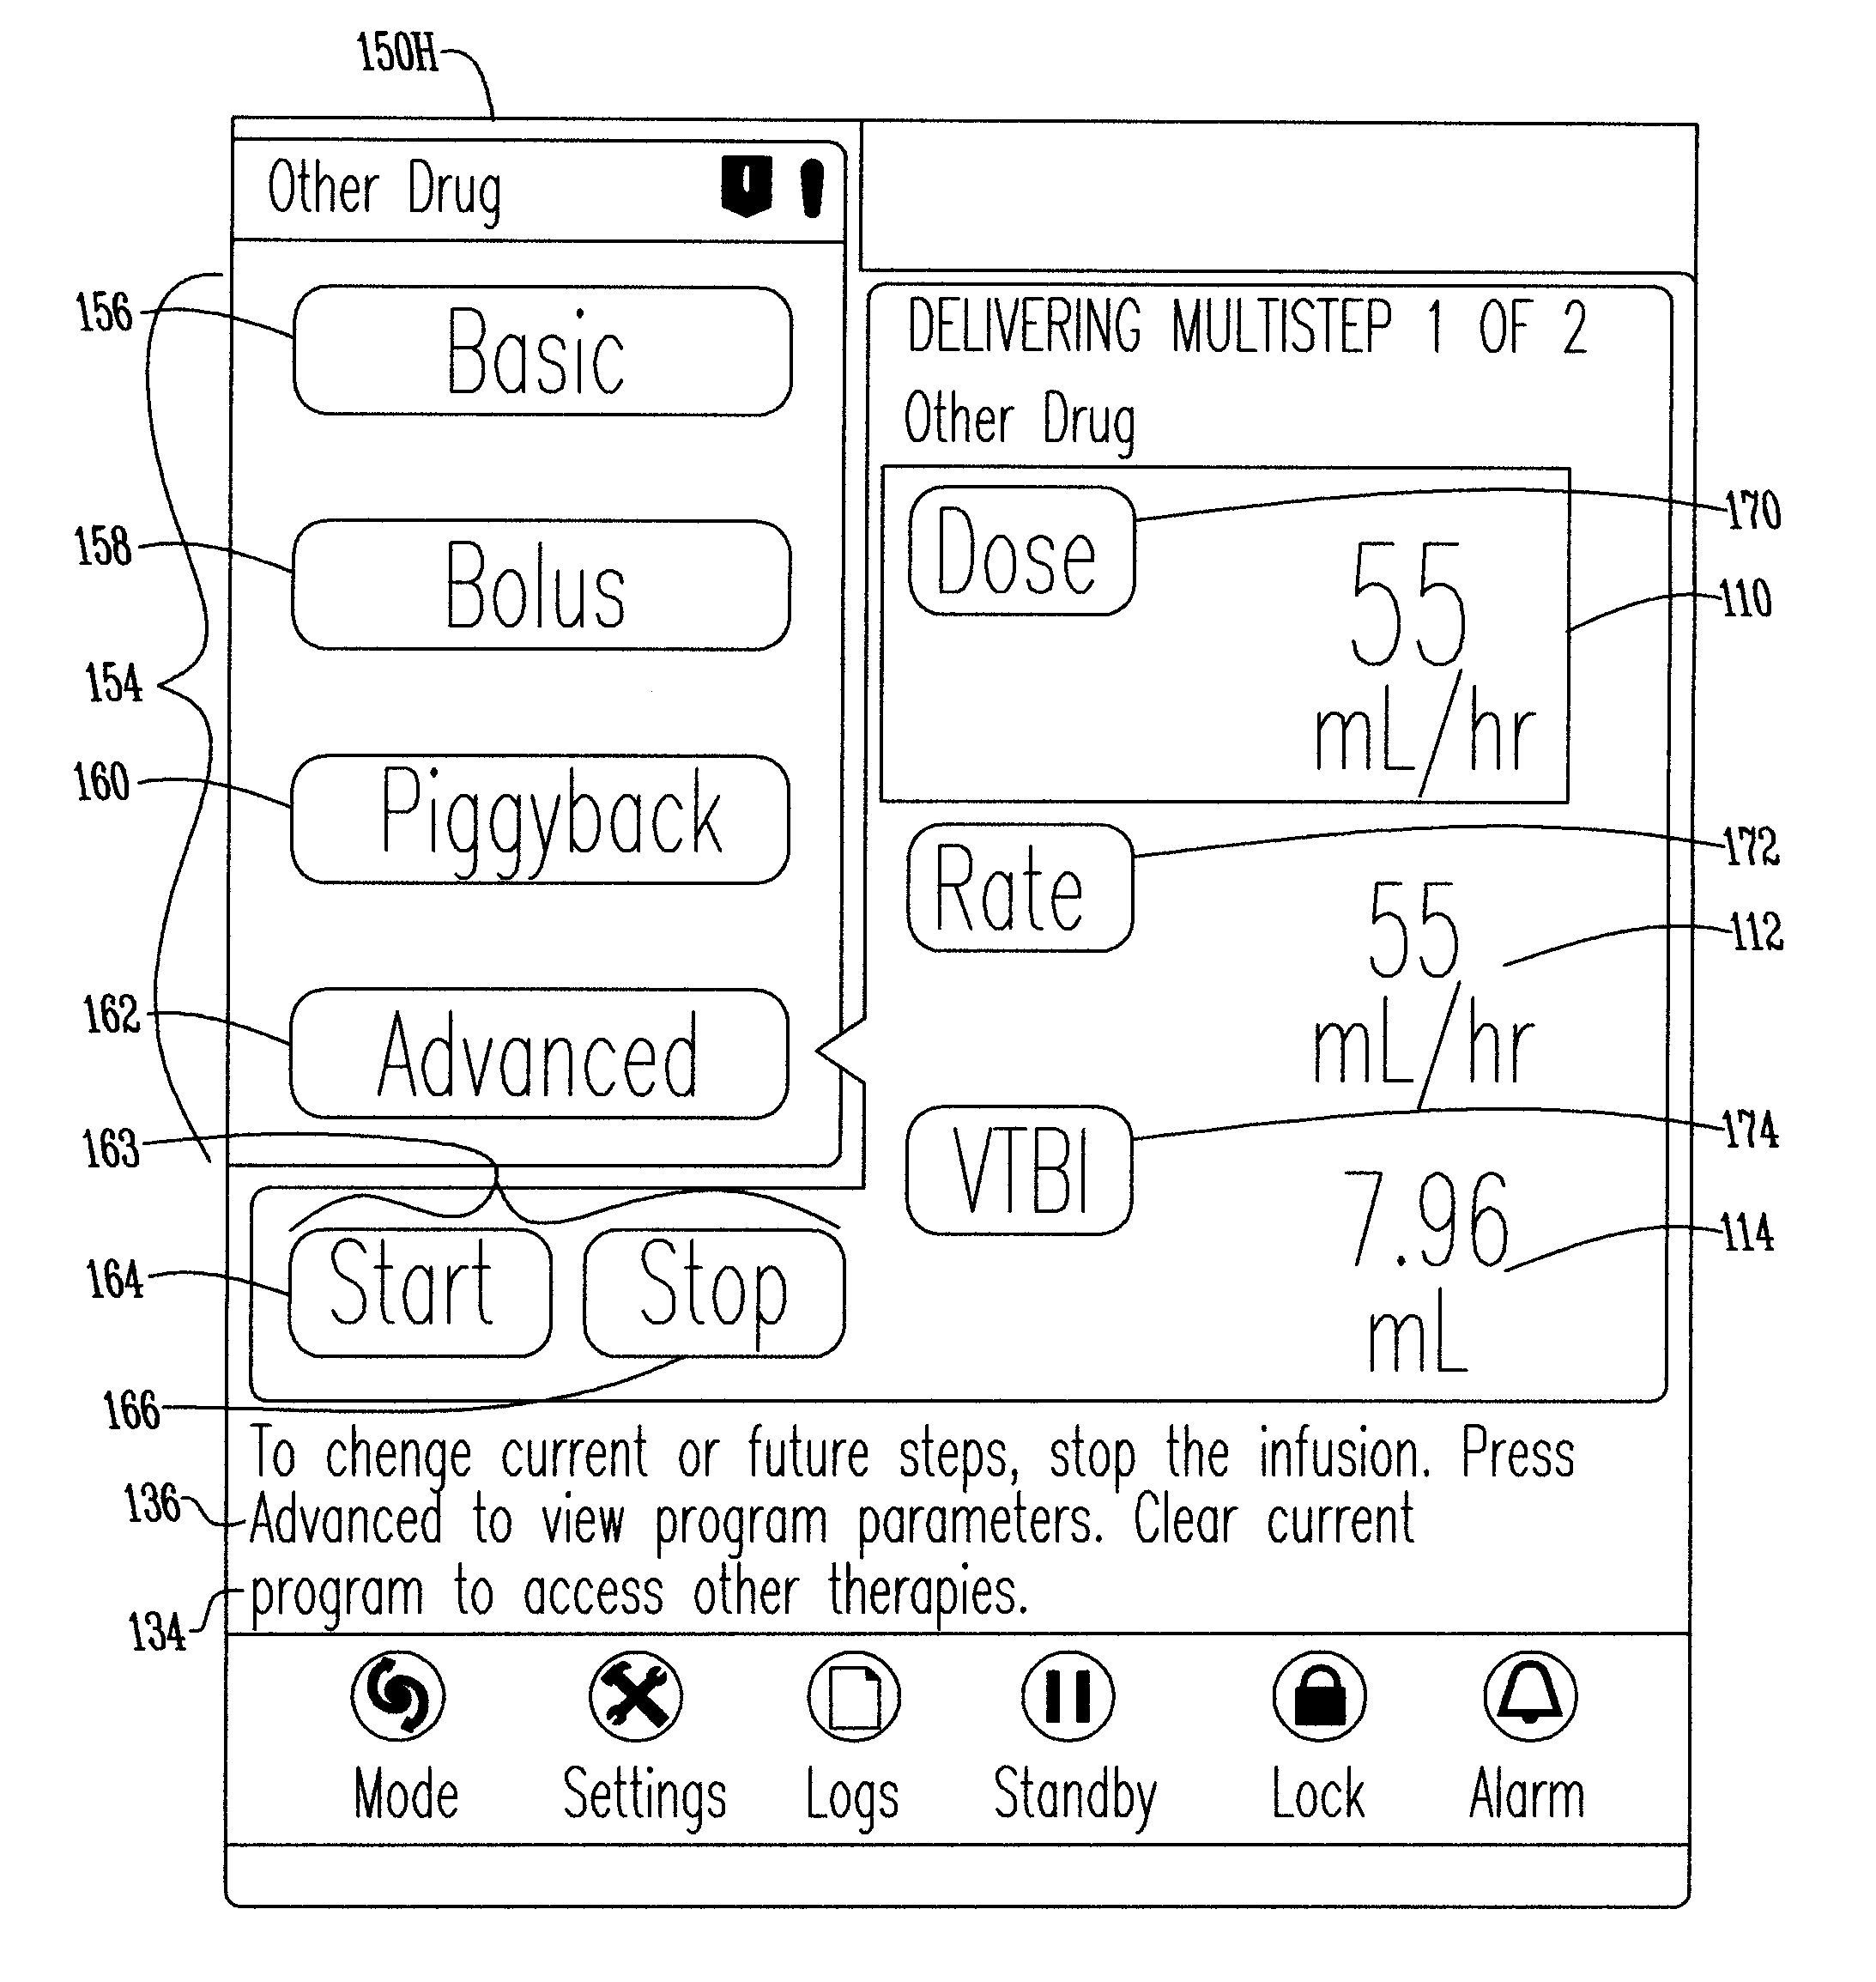 Touch screen system and navigation and programming methods for an infusion pump